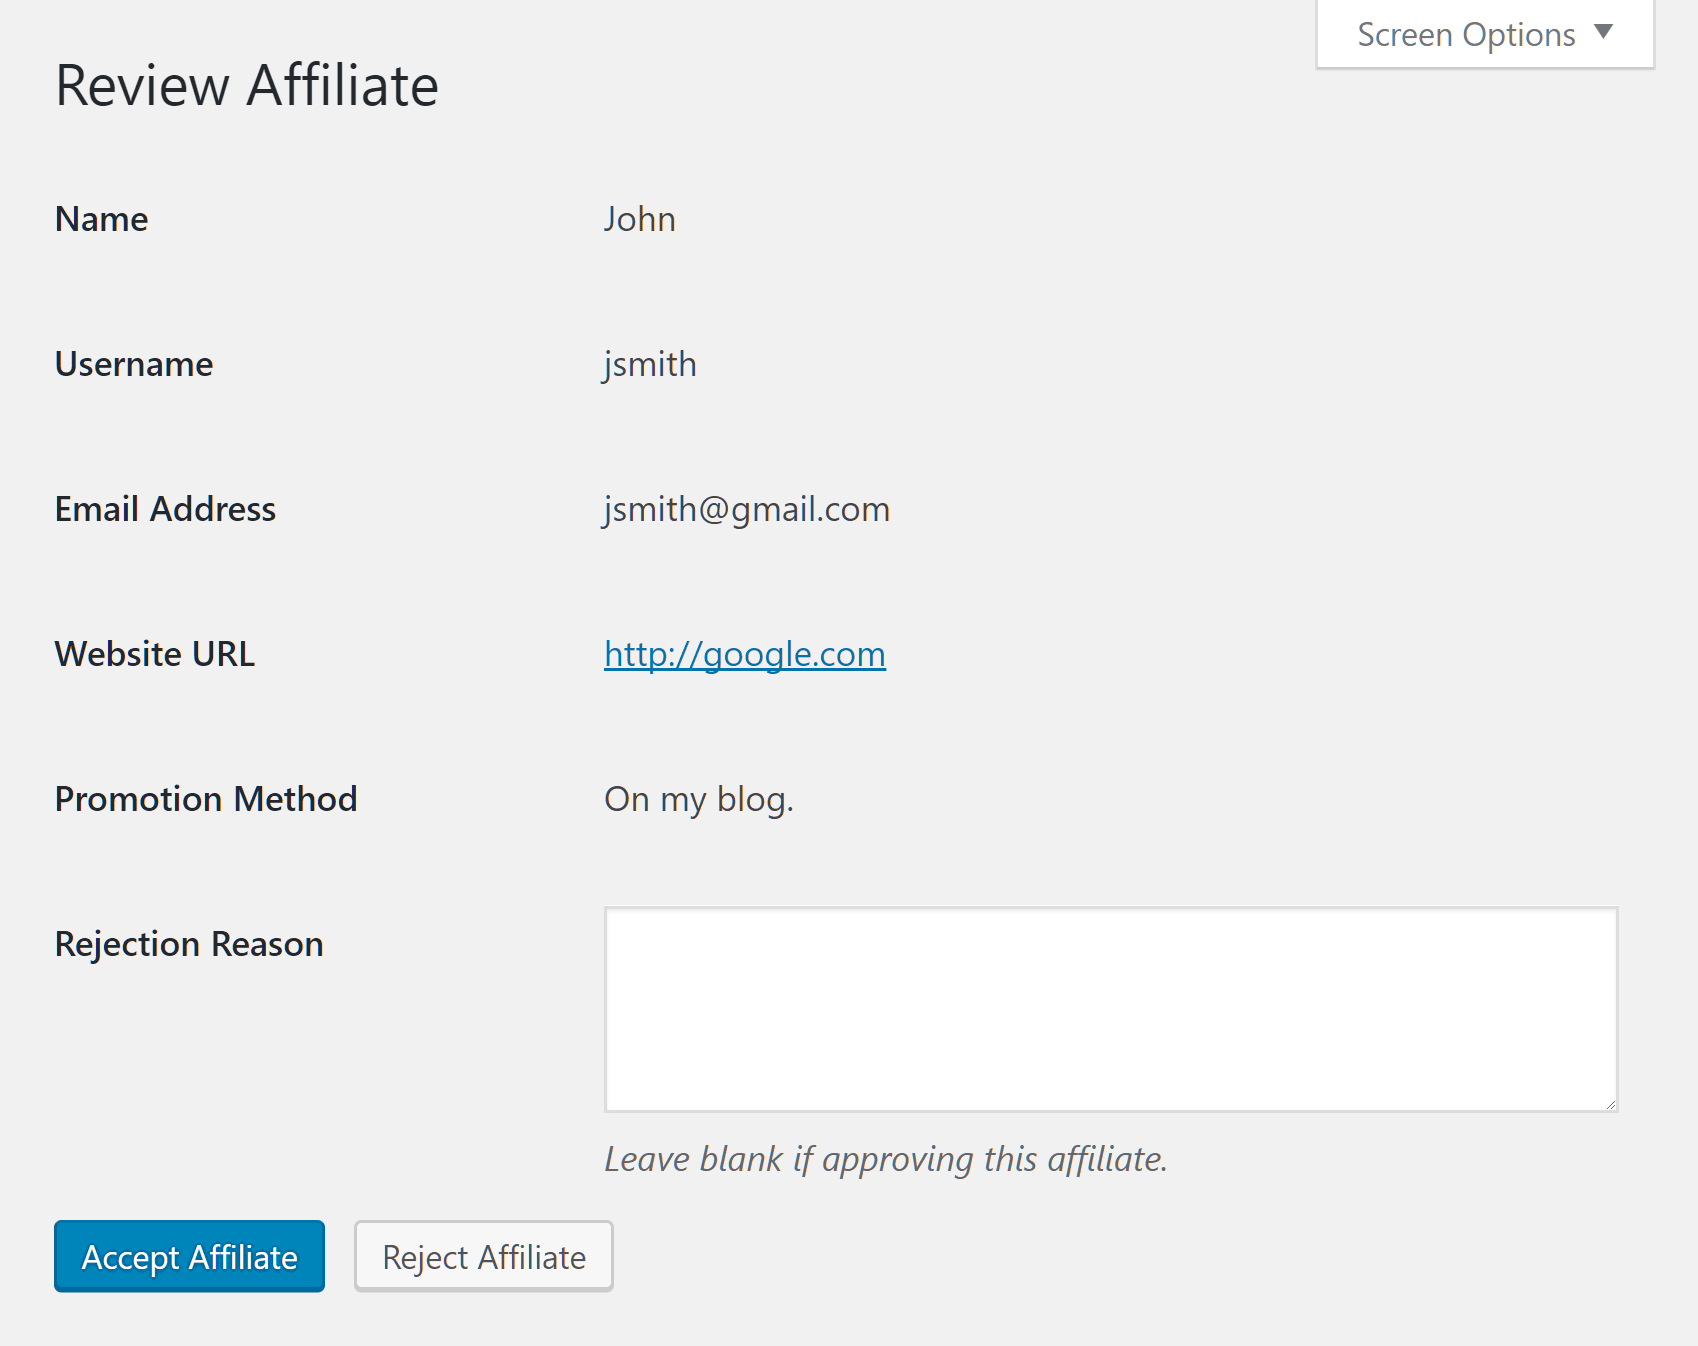 Review affiliate application screen 